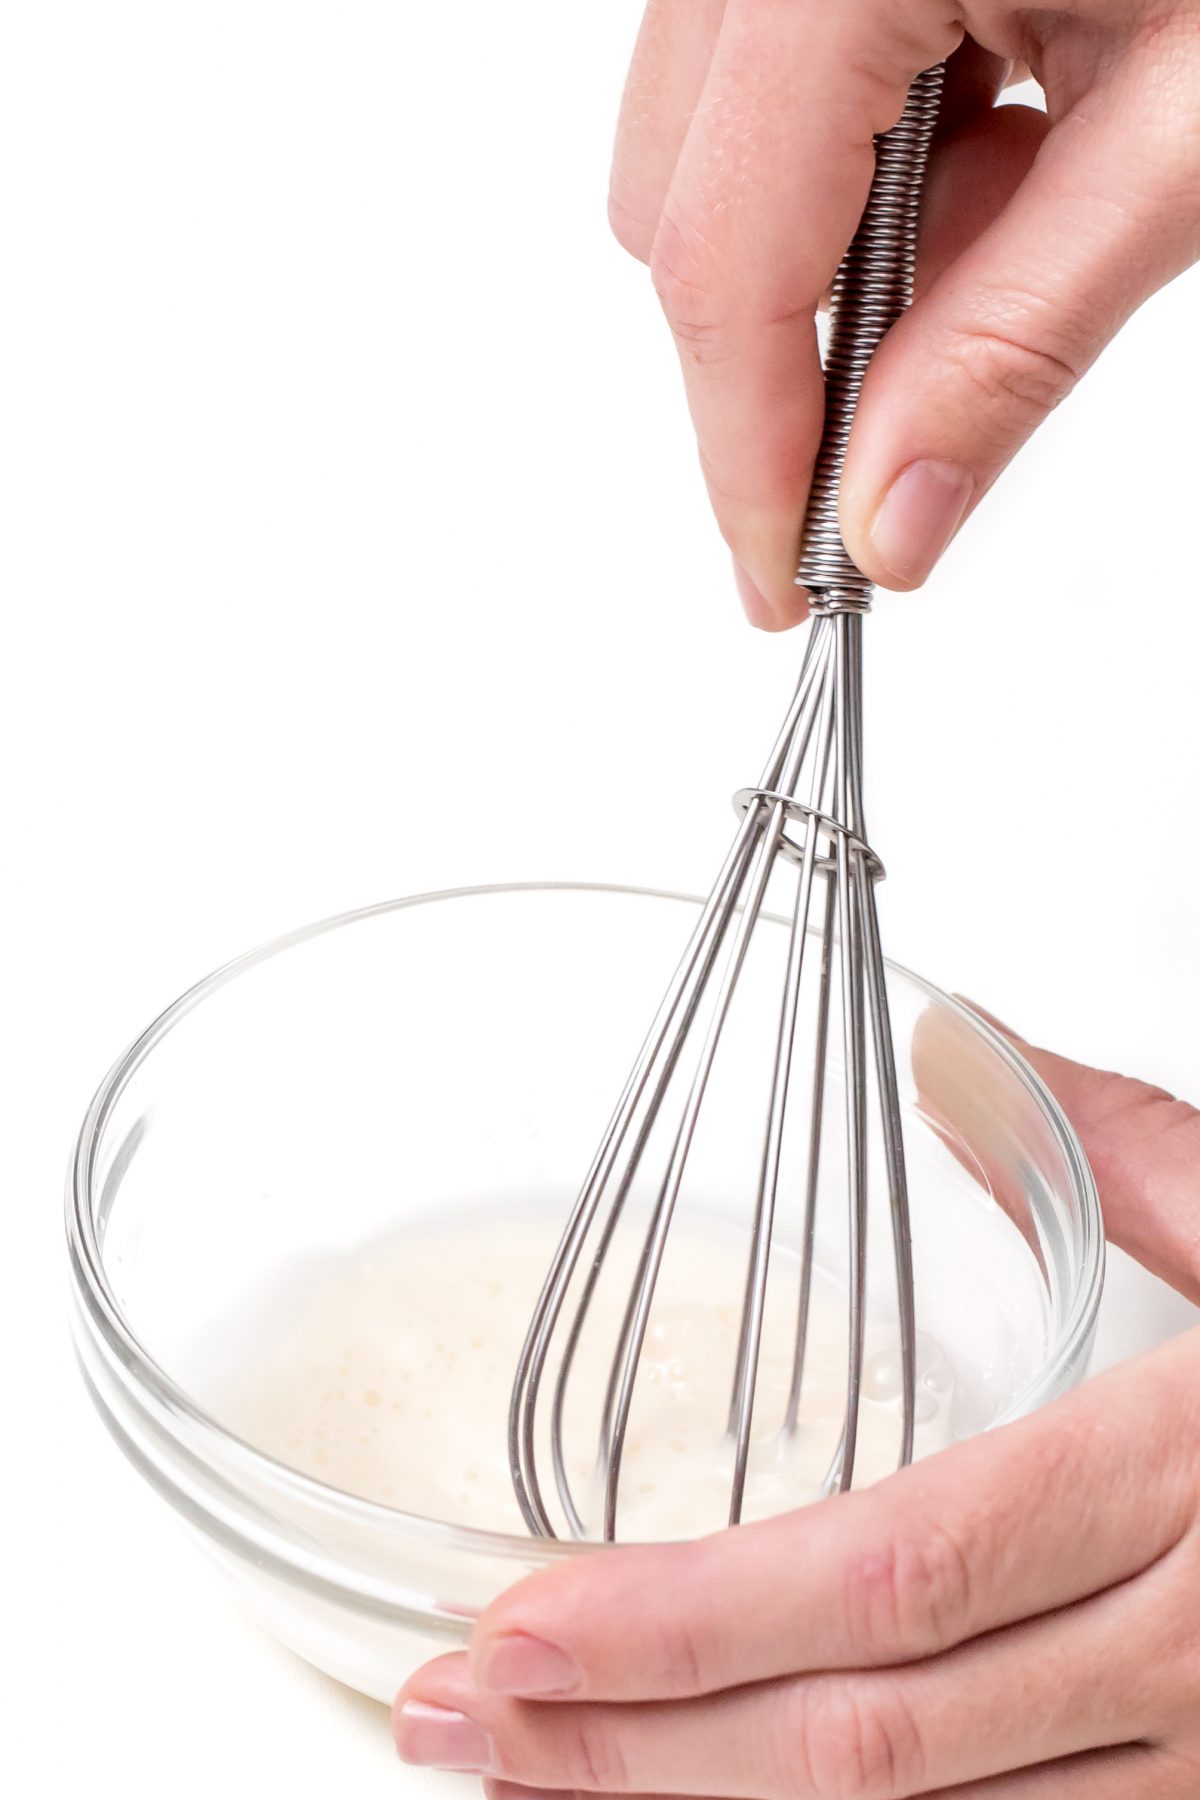 Whisk together chicken broth and cornstarch